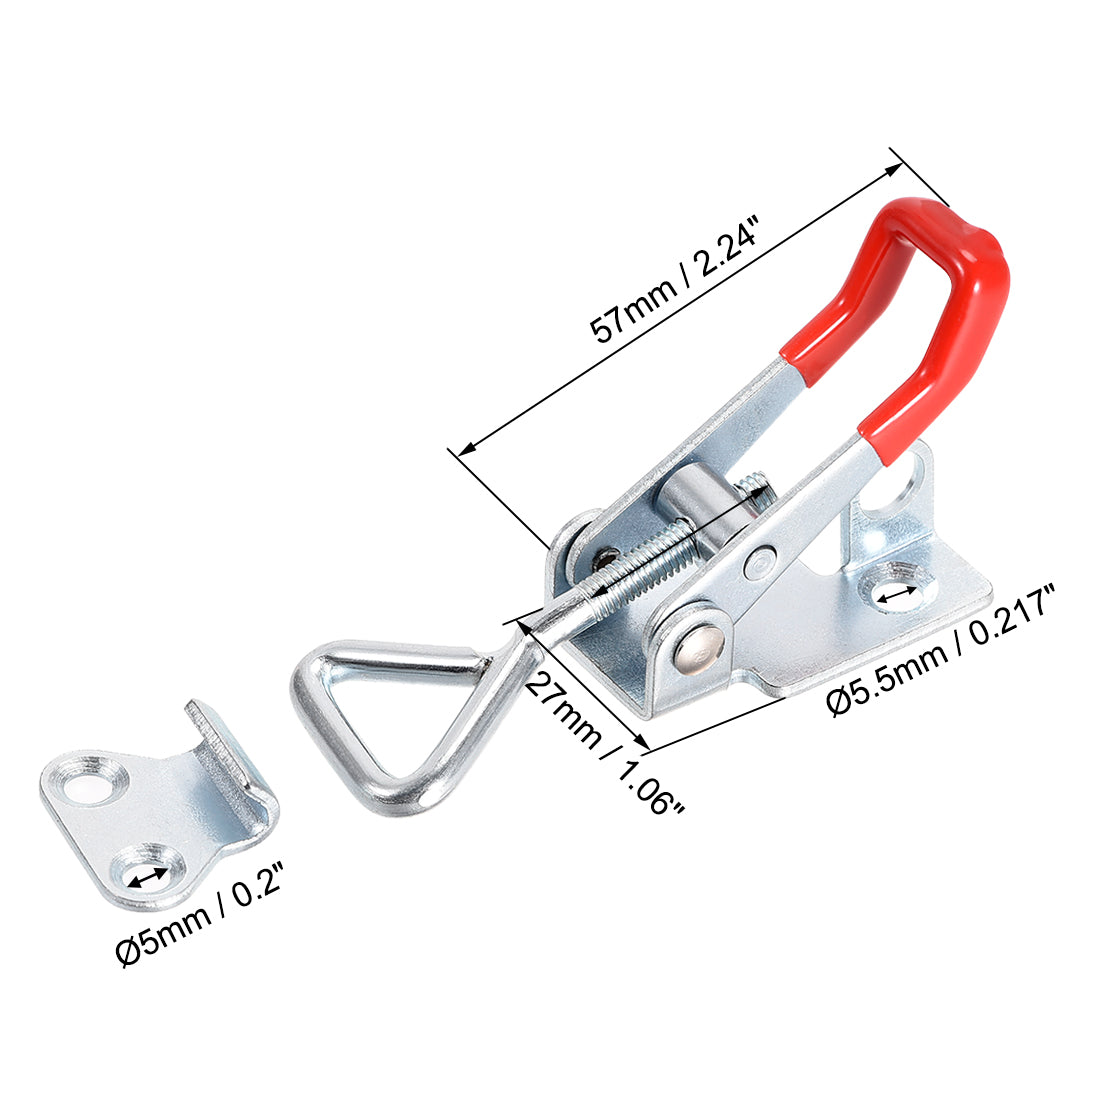 uxcell Uxcell 220lbs Holding Capacity Iron Pull-Action Latch Adjustable Toggle Clamp